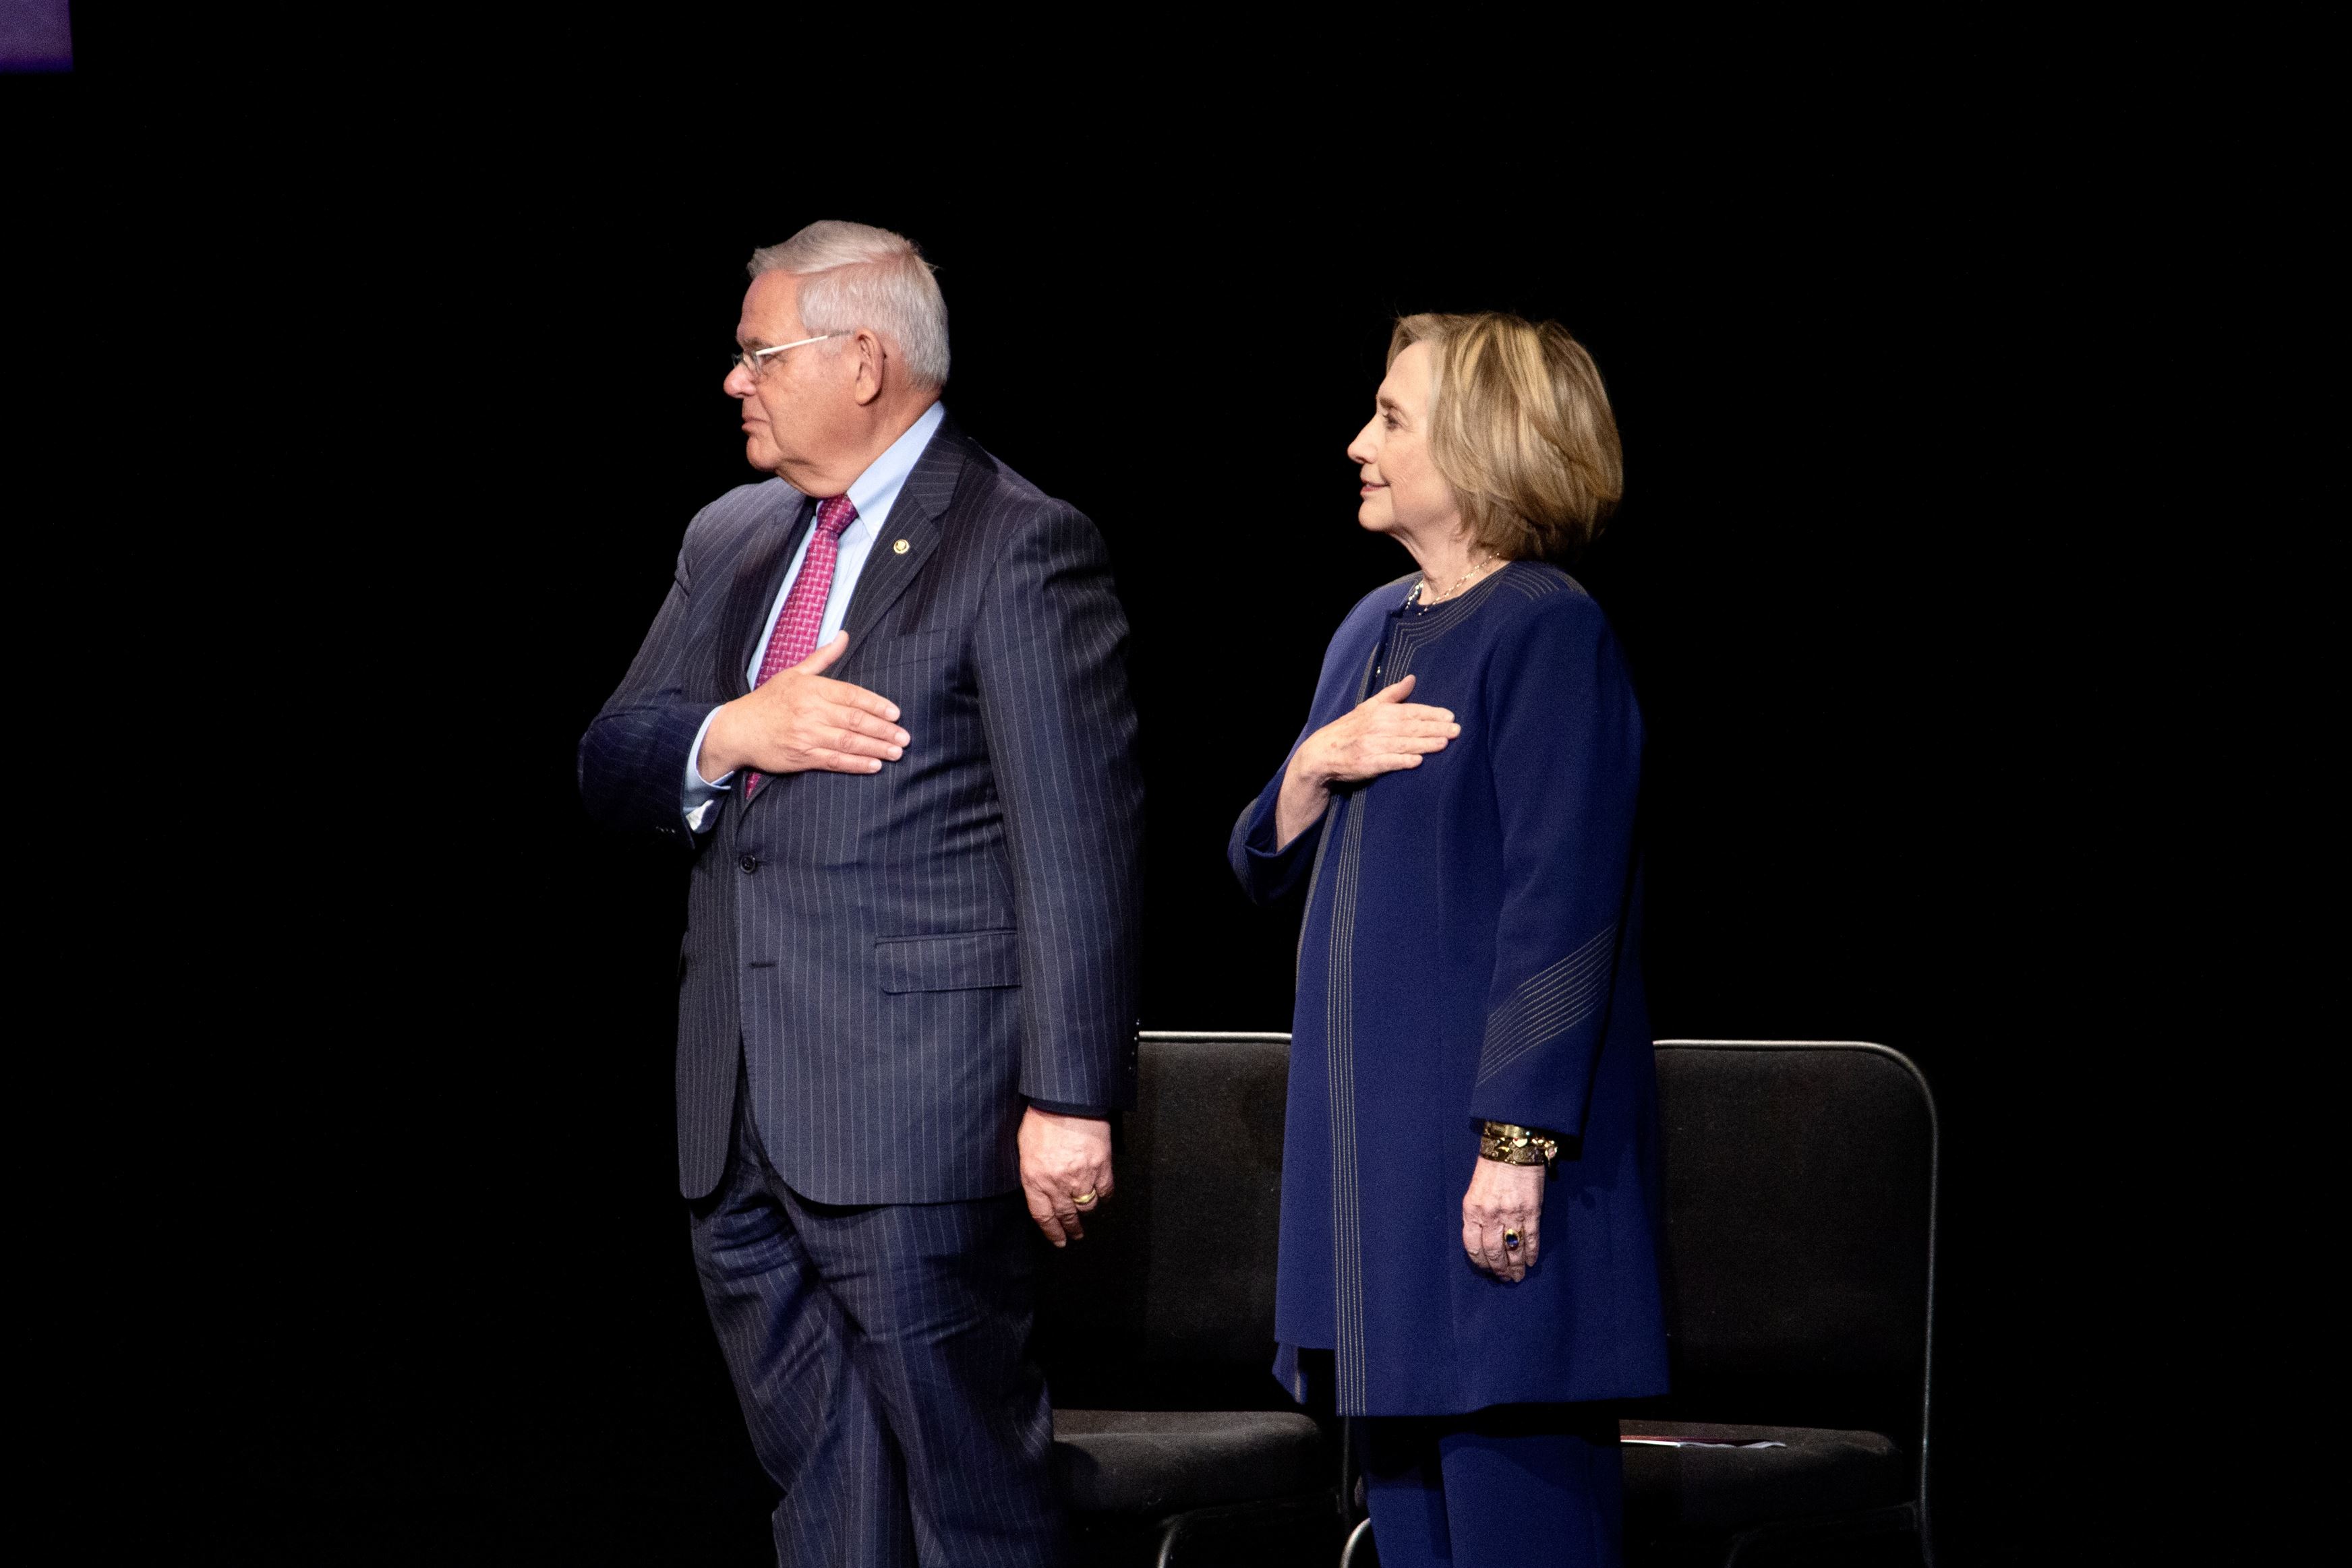 Senator Bob Menendez (D-N.J.) and former Secretary of State Hillary Clinton stand for the national anthem.
Sal DiMaggio | The Montclarion